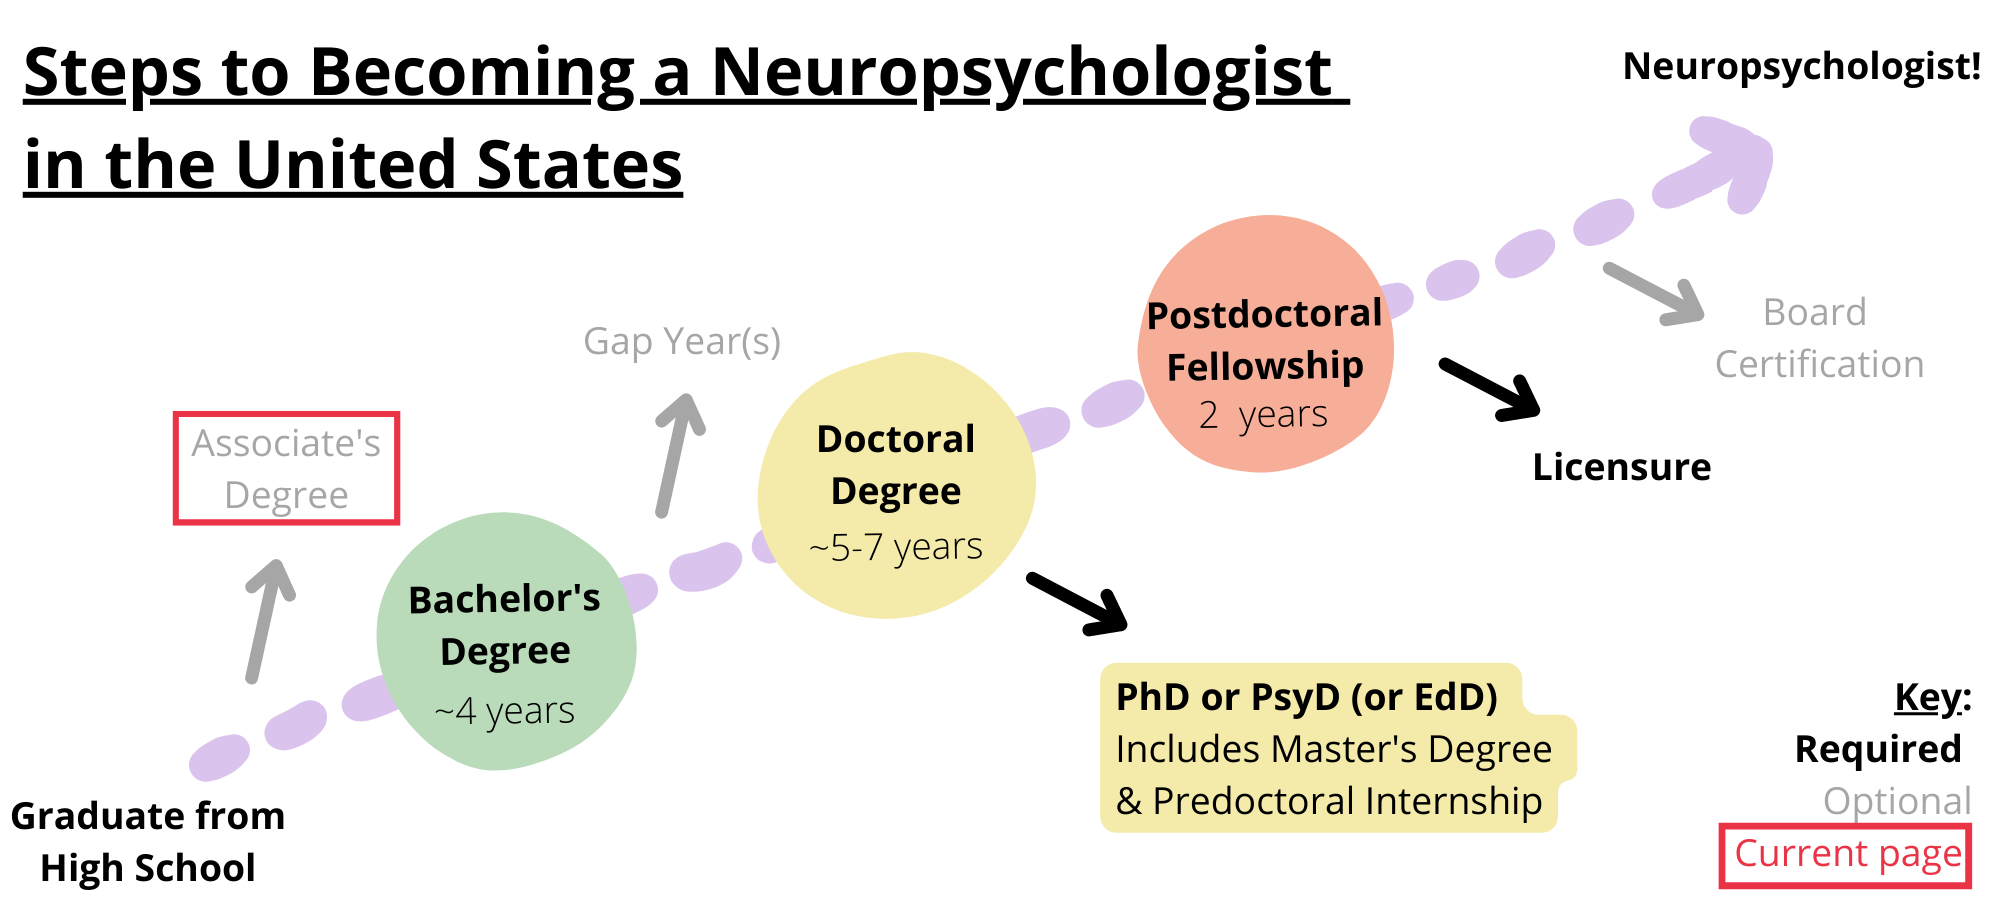 Steps to becoming a neuropsychologist in the United States. Required steps include graduating from high school, obtaining a bachelor’s degree, obtaining a doctoral degree like a PhD, PsyD, or EdD, completing a postdoctoral fellowship, and licensure. Optional steps include obtaining an associate’s degree, taking a gap year, and board certification. You are on the step associate's degree.